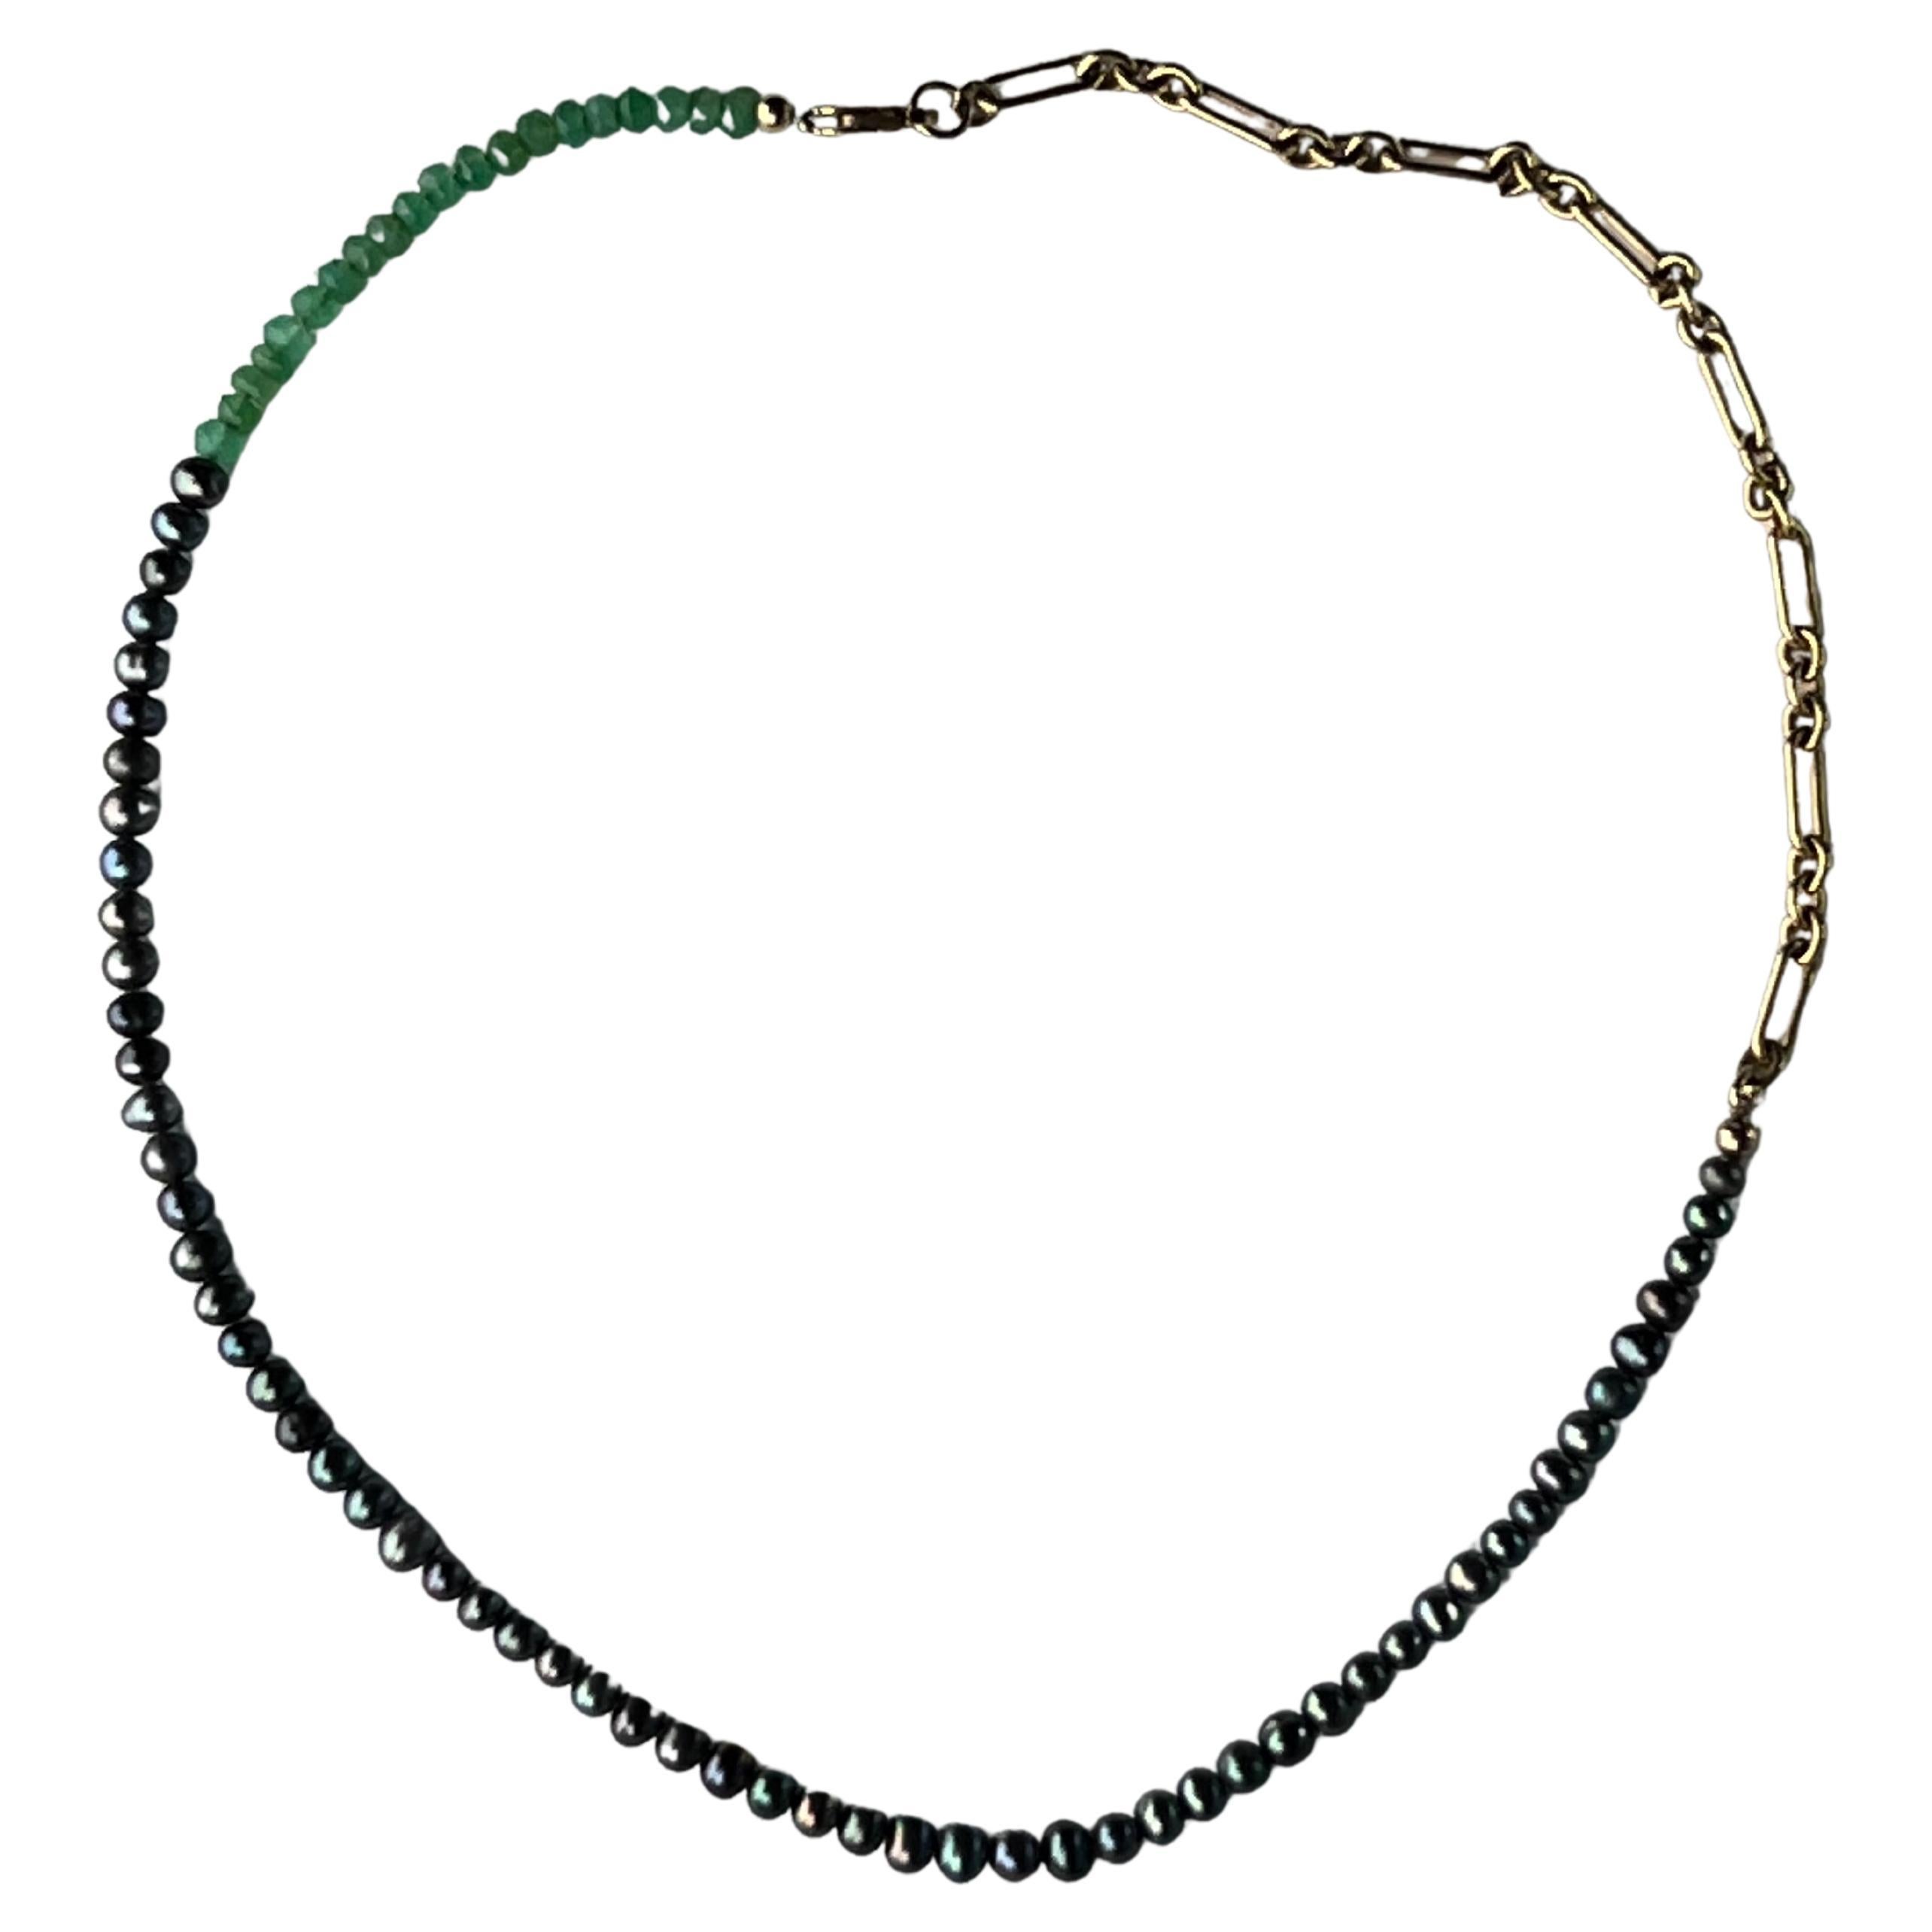 Black Pearl Chrysoprase Gold Filled Chain Choker Necklace 16